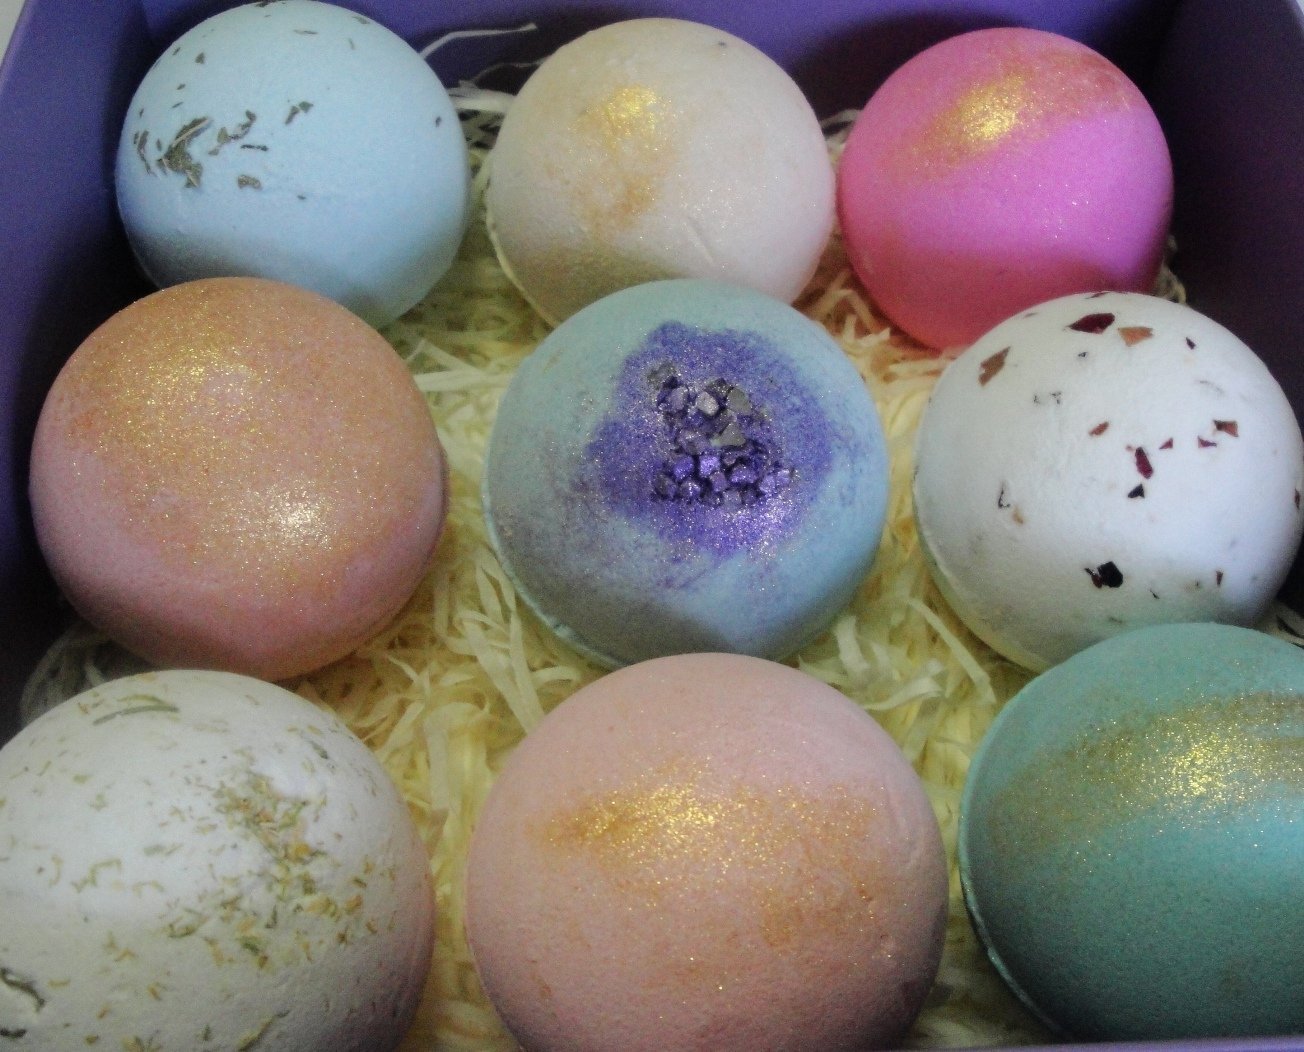 Organic hand made with Essential Oils and Shea Butter 9 pc set Bath Bombs